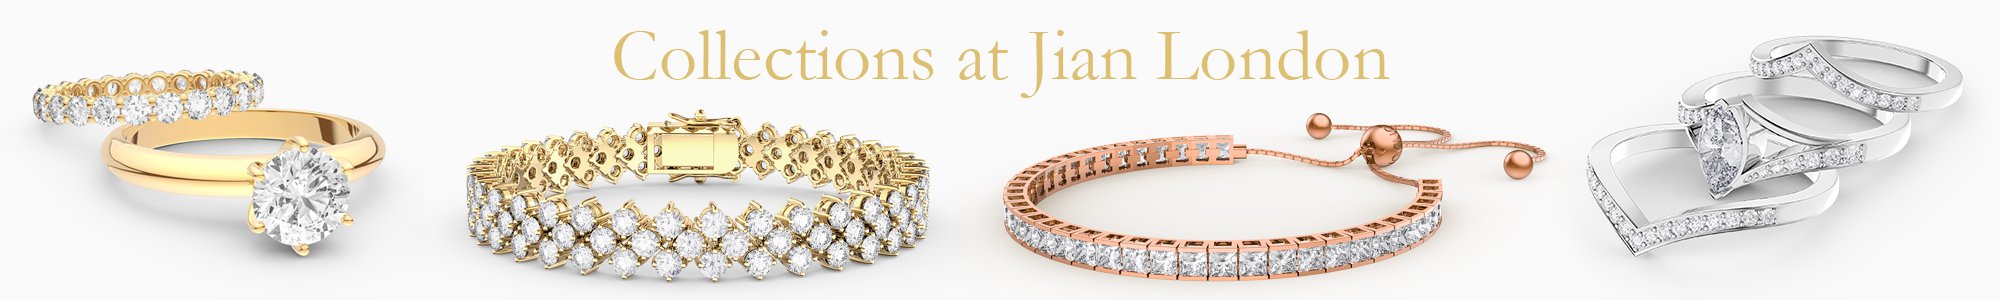 Jewelry Collections for everyone - from precious gemstones to Diamonds. From Silver to 18K Gold.